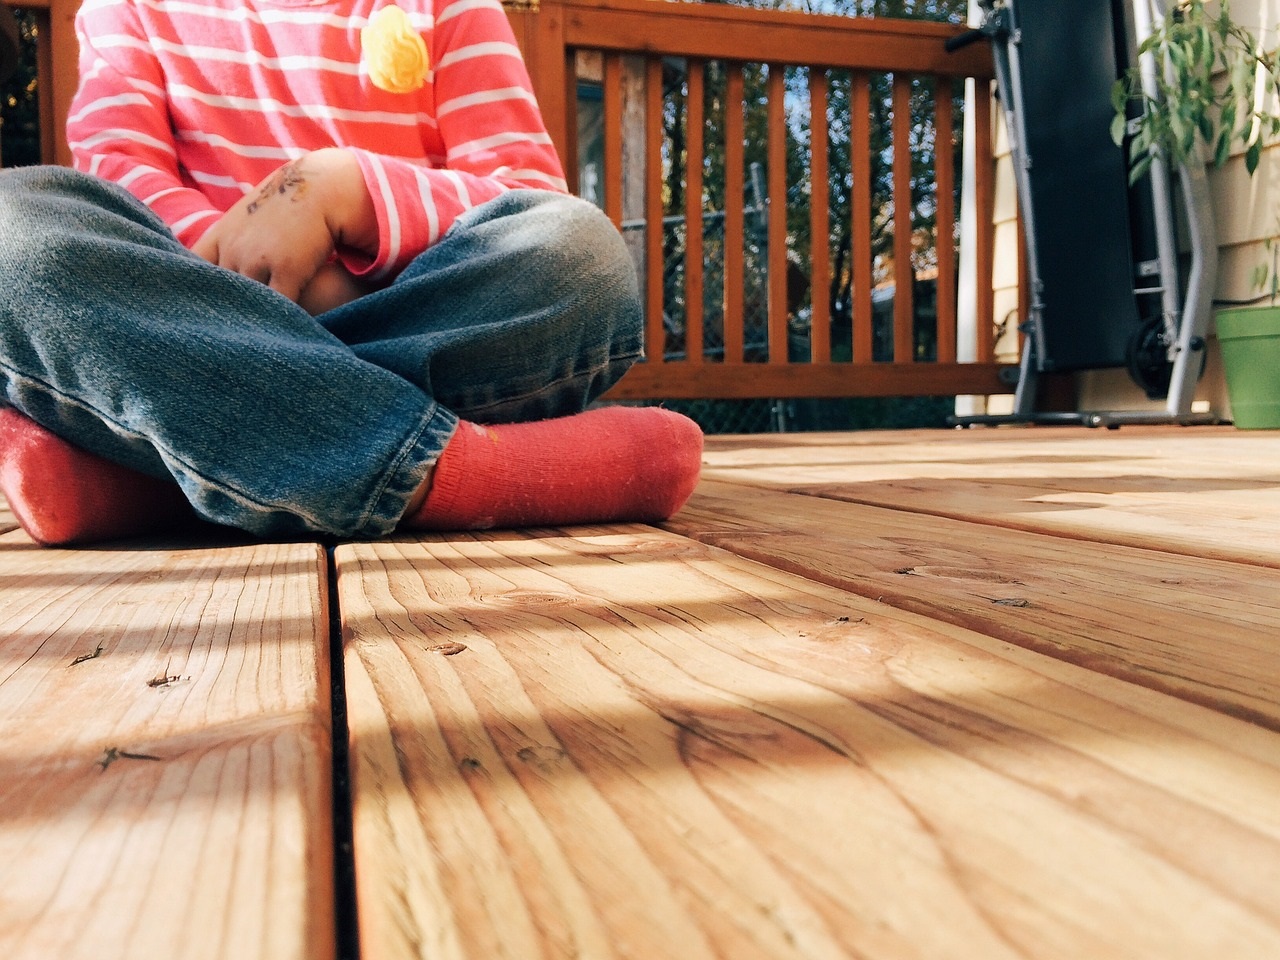 Child wearing jeans and red socks sitting on wooden deck